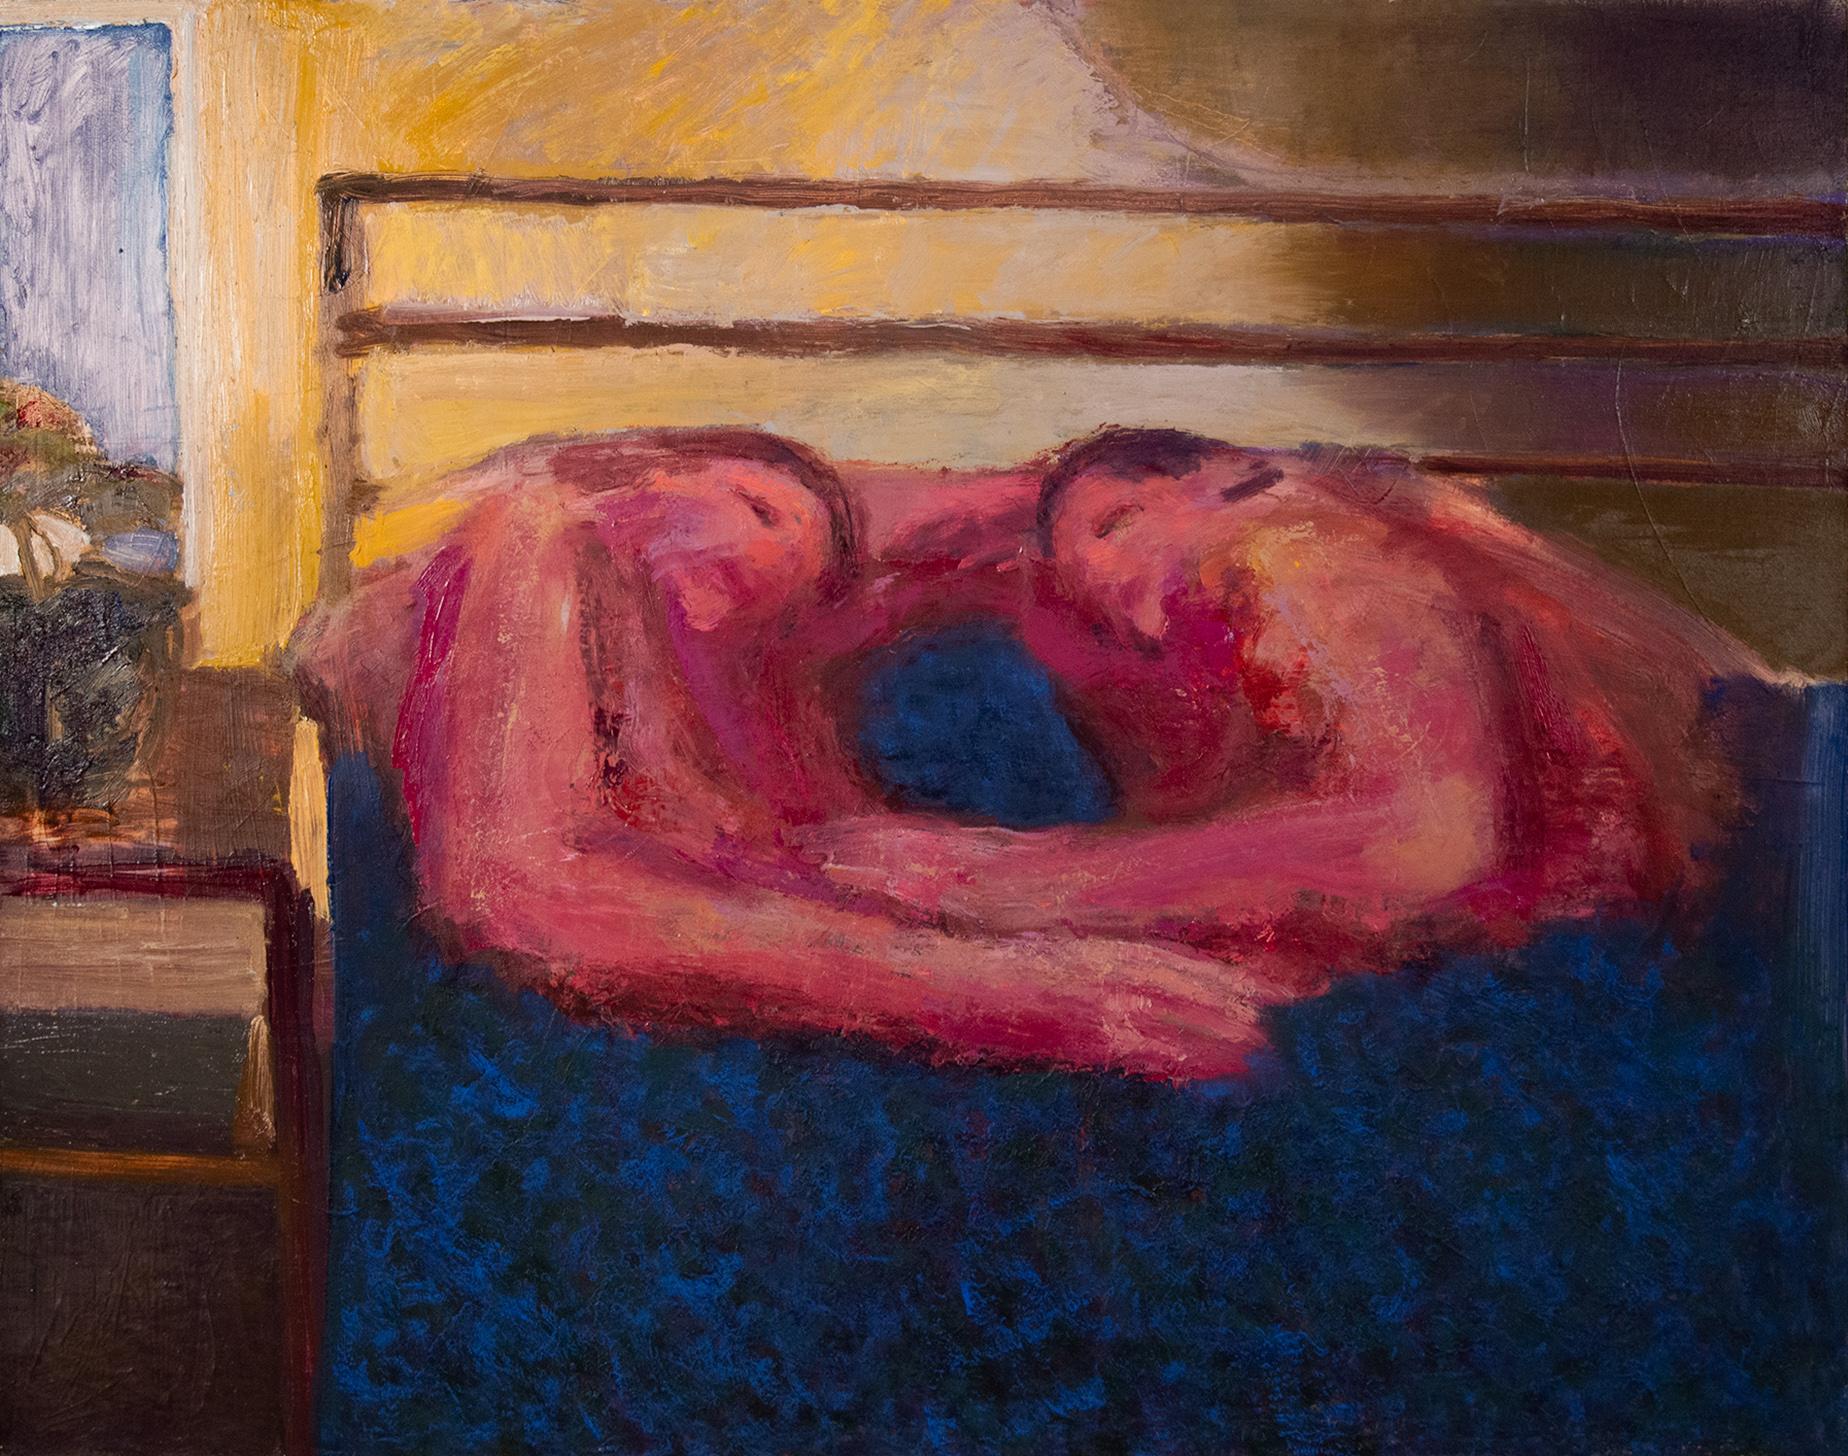 Francisco Rocha Salazar Nude Painting - Nosotros, figurative oil painting of two people embracing in bed, red and blue